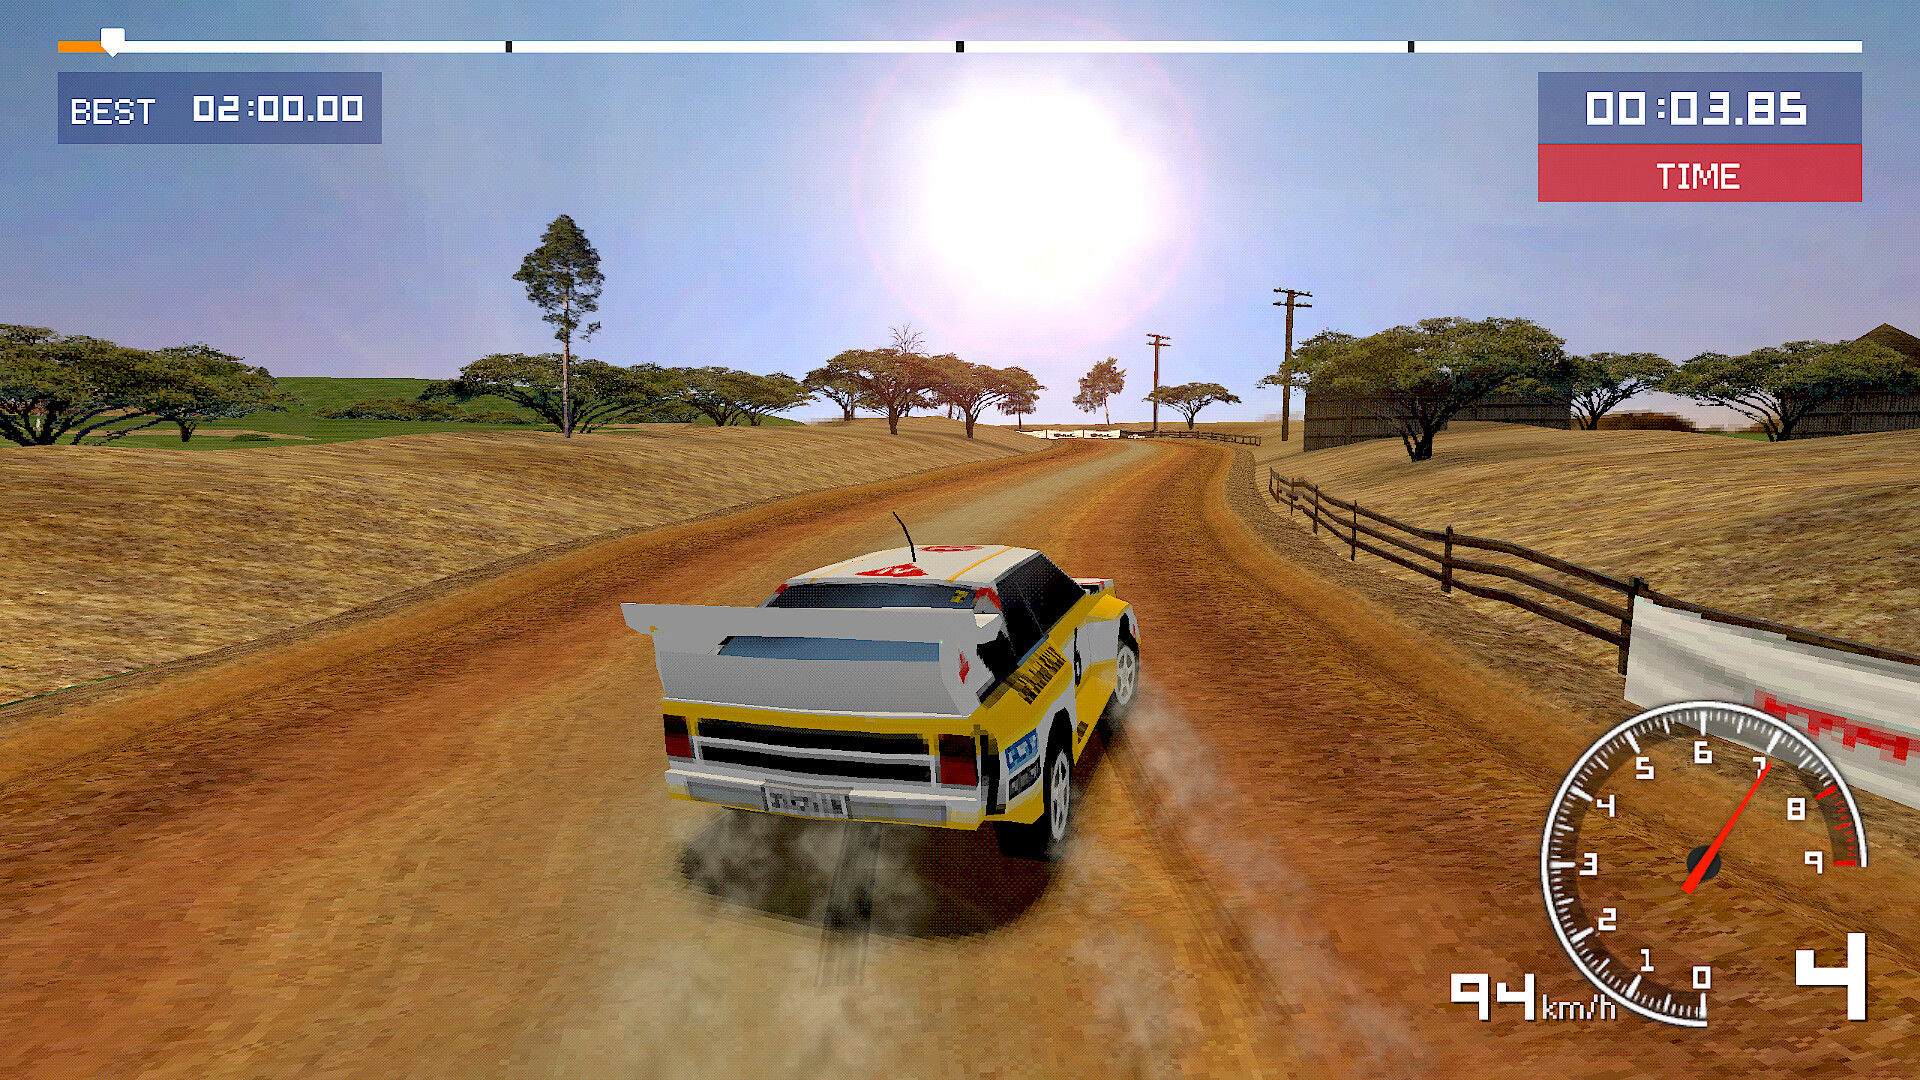 Old School Rally Sarcastic Journey for Sega Rally Fans